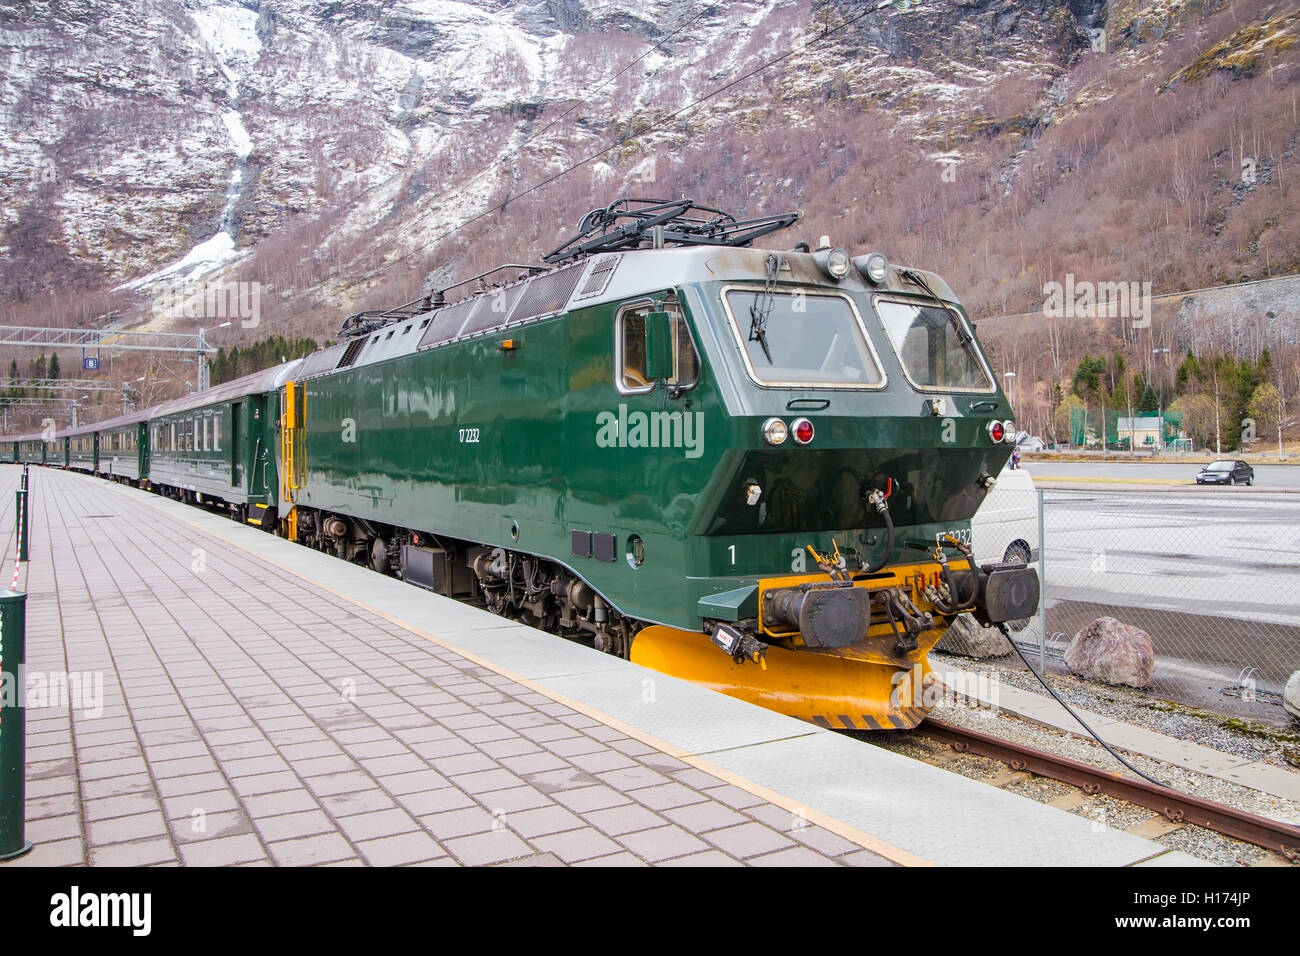 The train at the platform amid high mountains Stock Photo